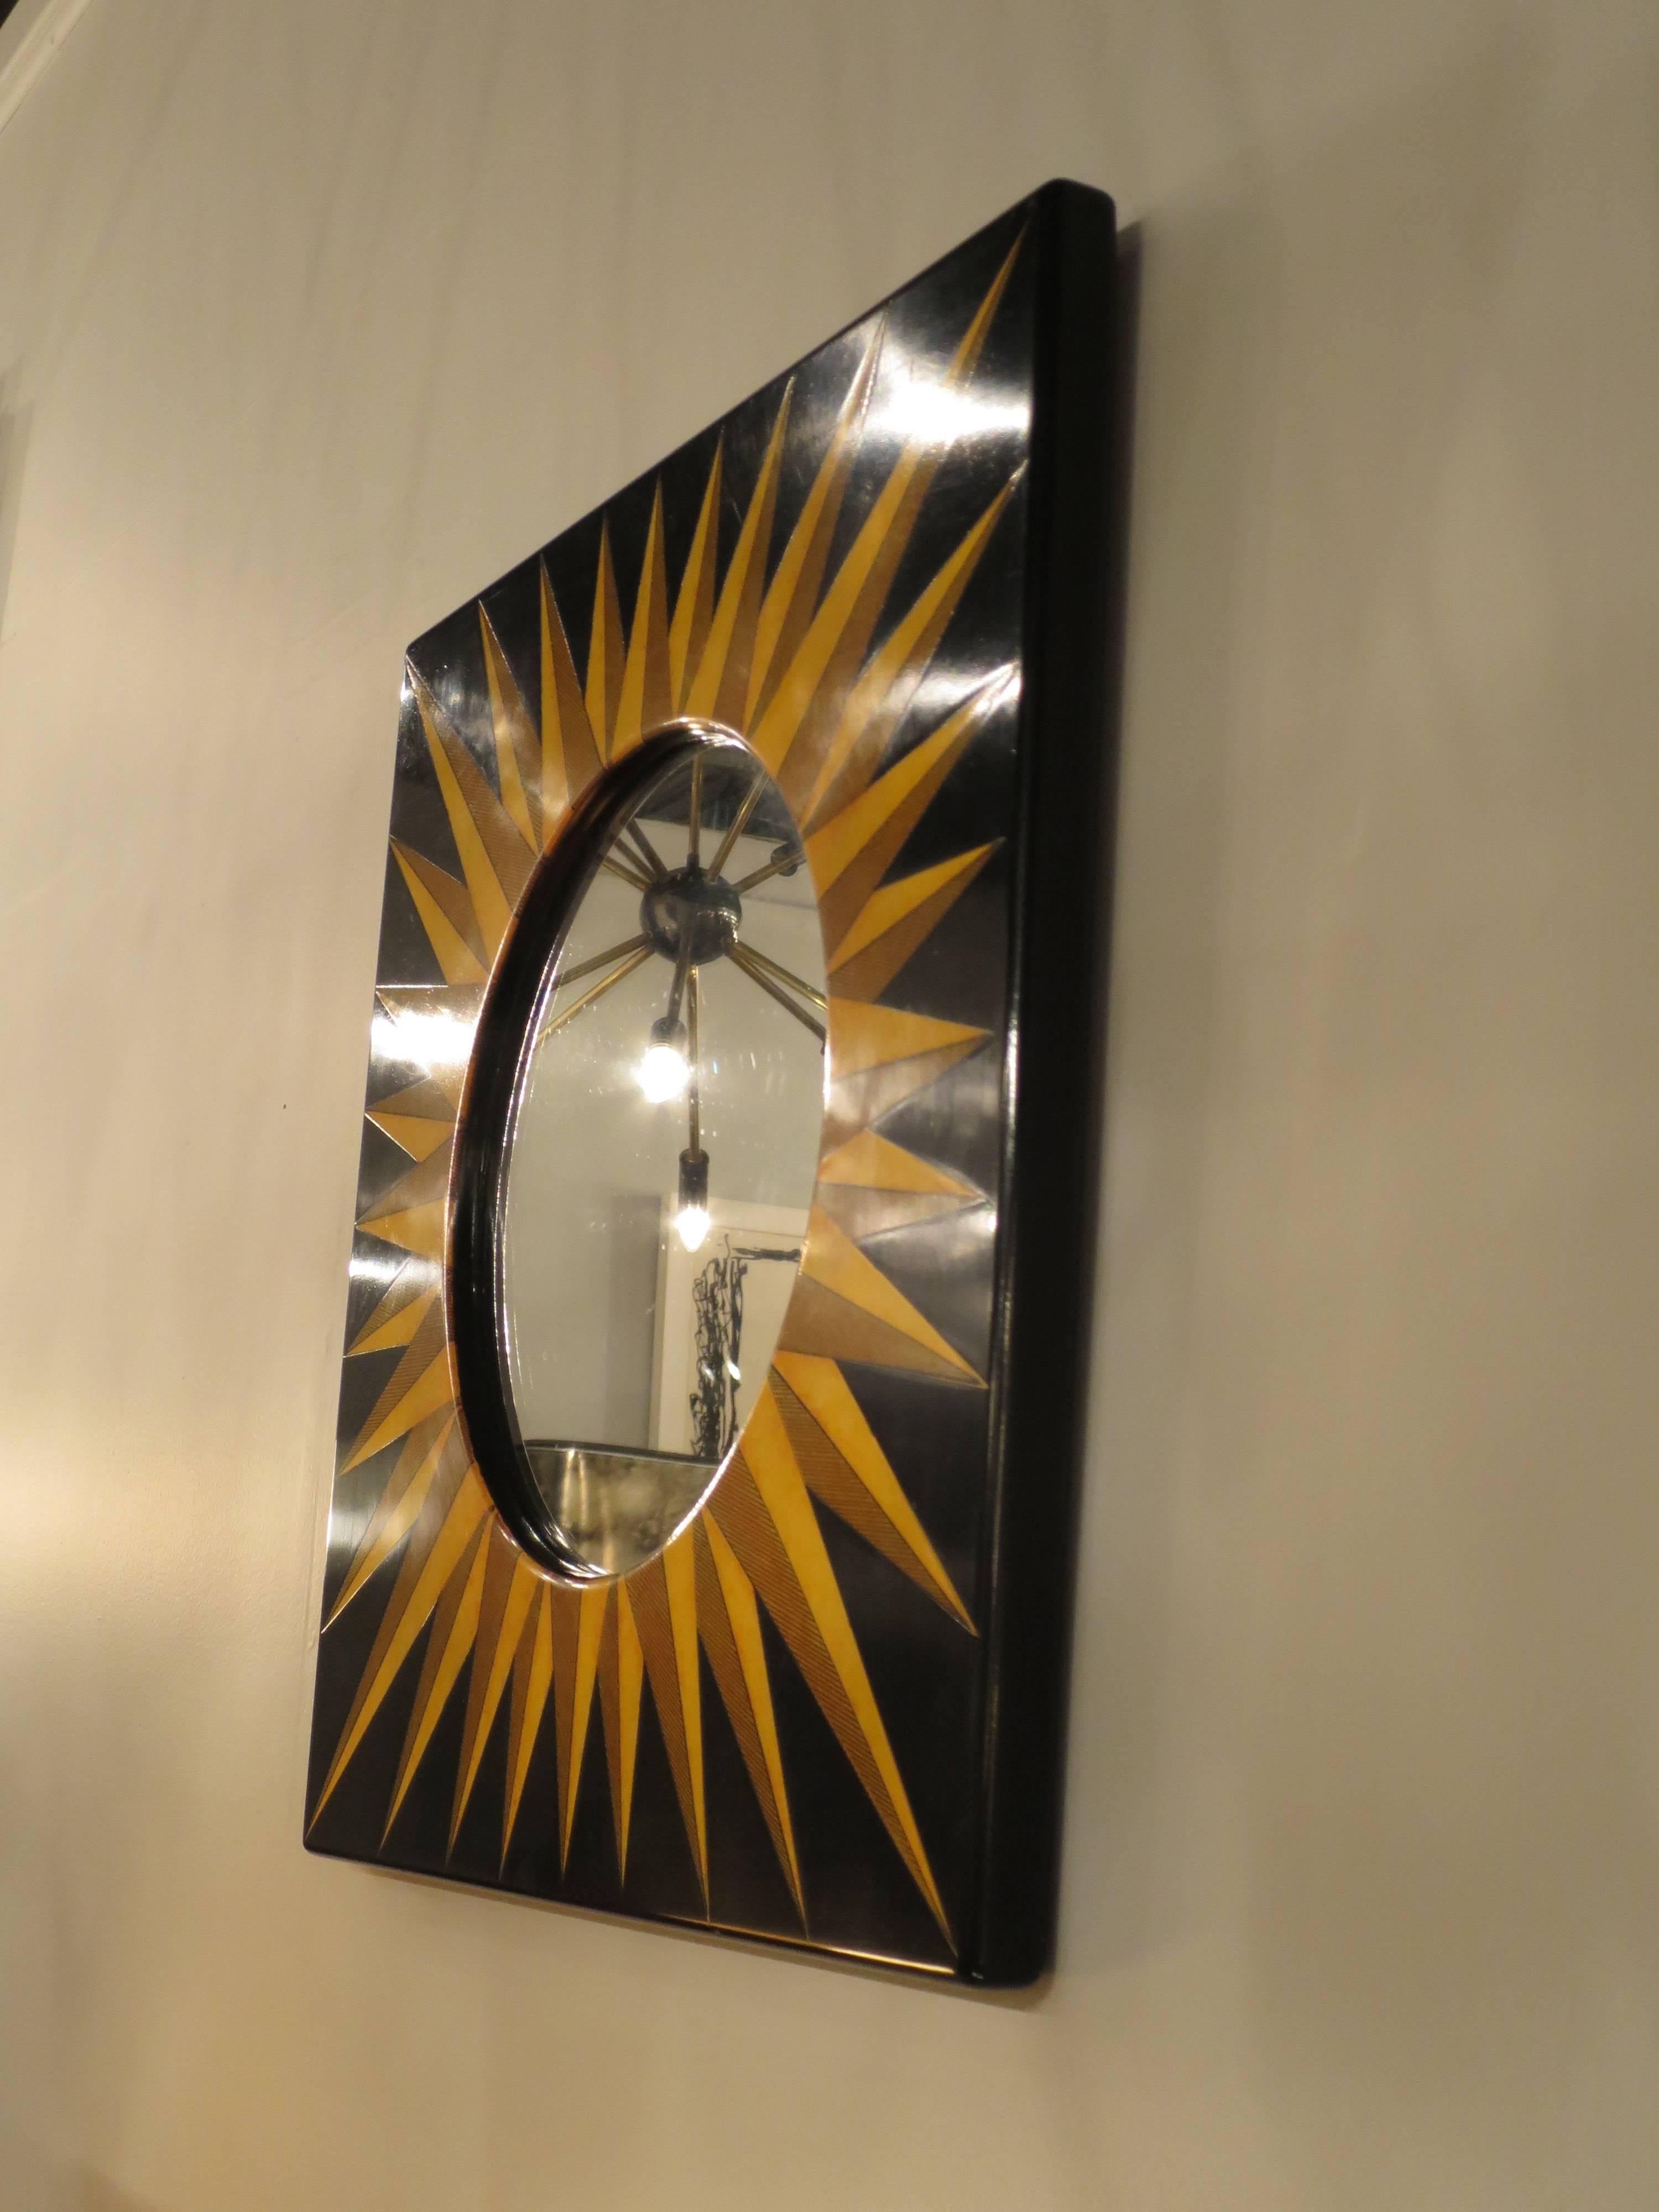 Decorative black and gold sunburst mirror by Fornasetti, Italy, 1950s.